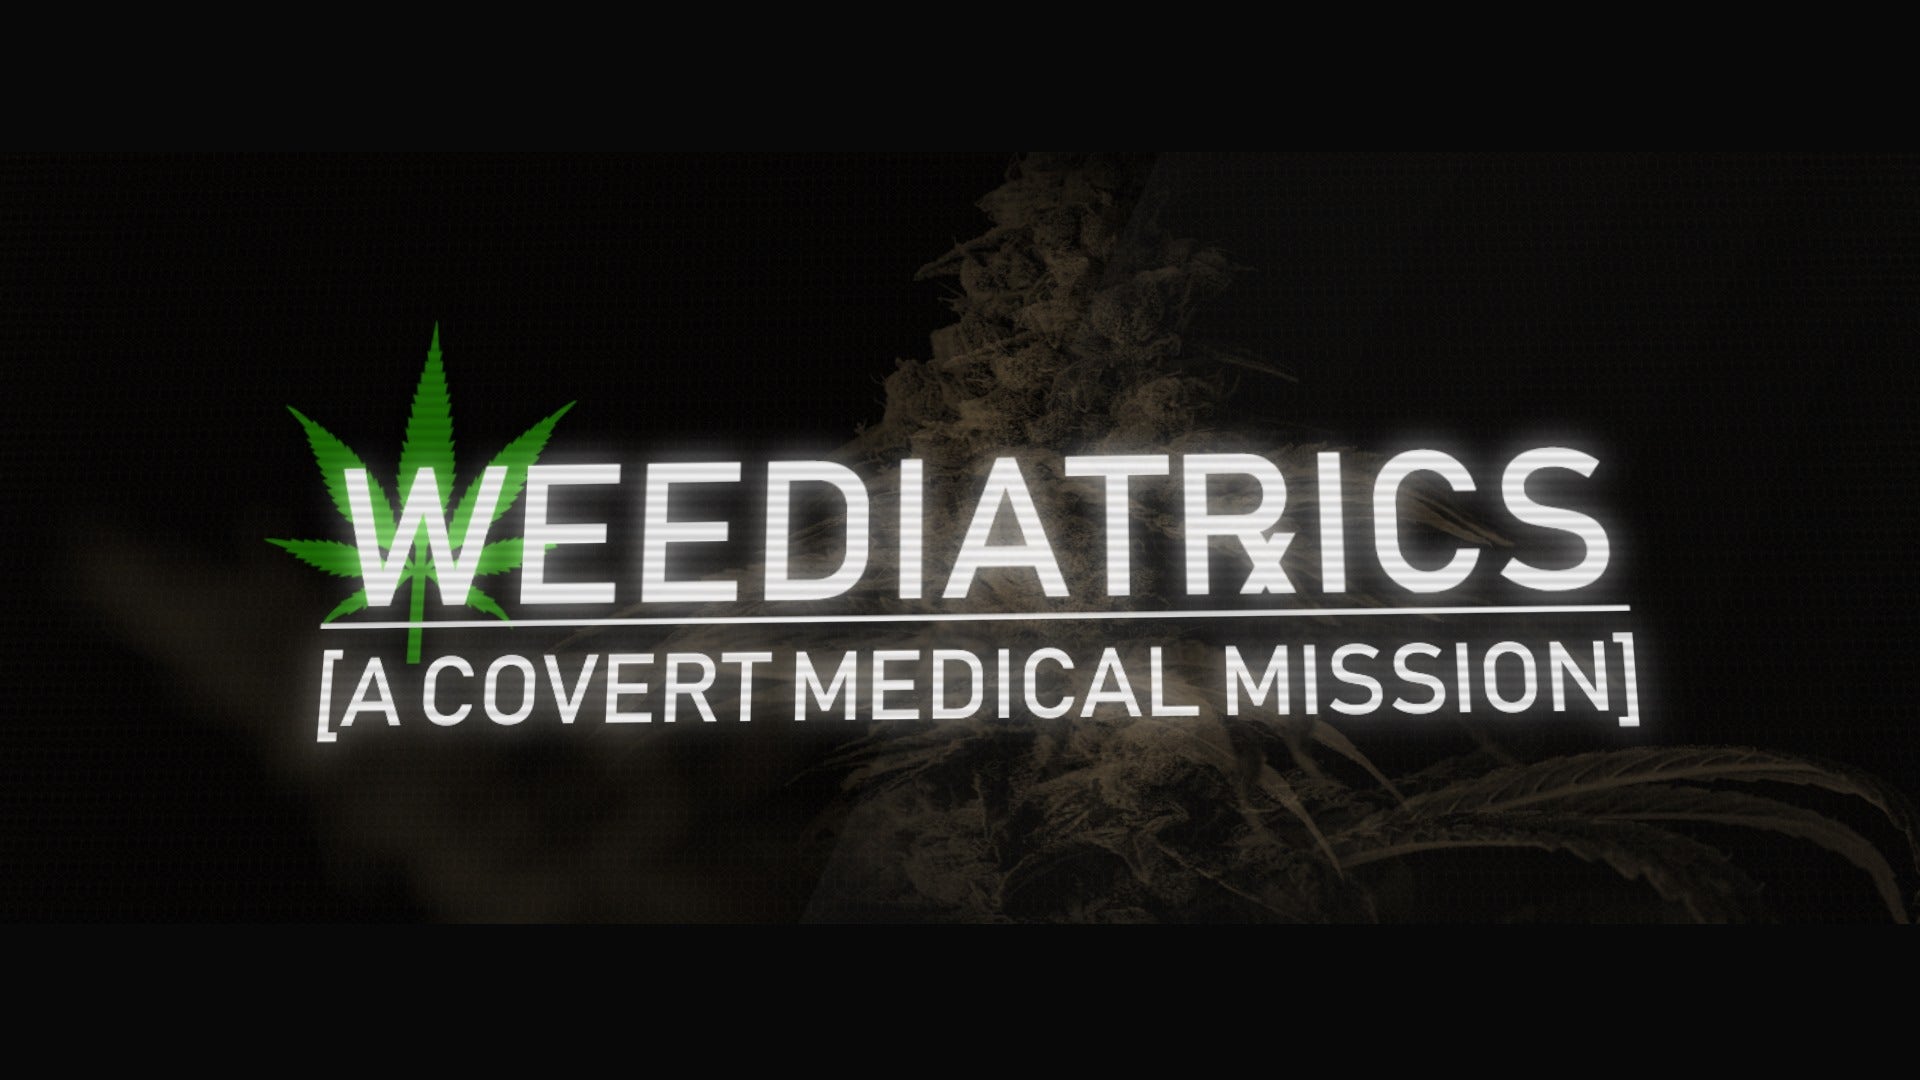 'Weediatrics': The New Film That Looks Into Medical Cannabis For Children Suffering From Debilitating Conditions